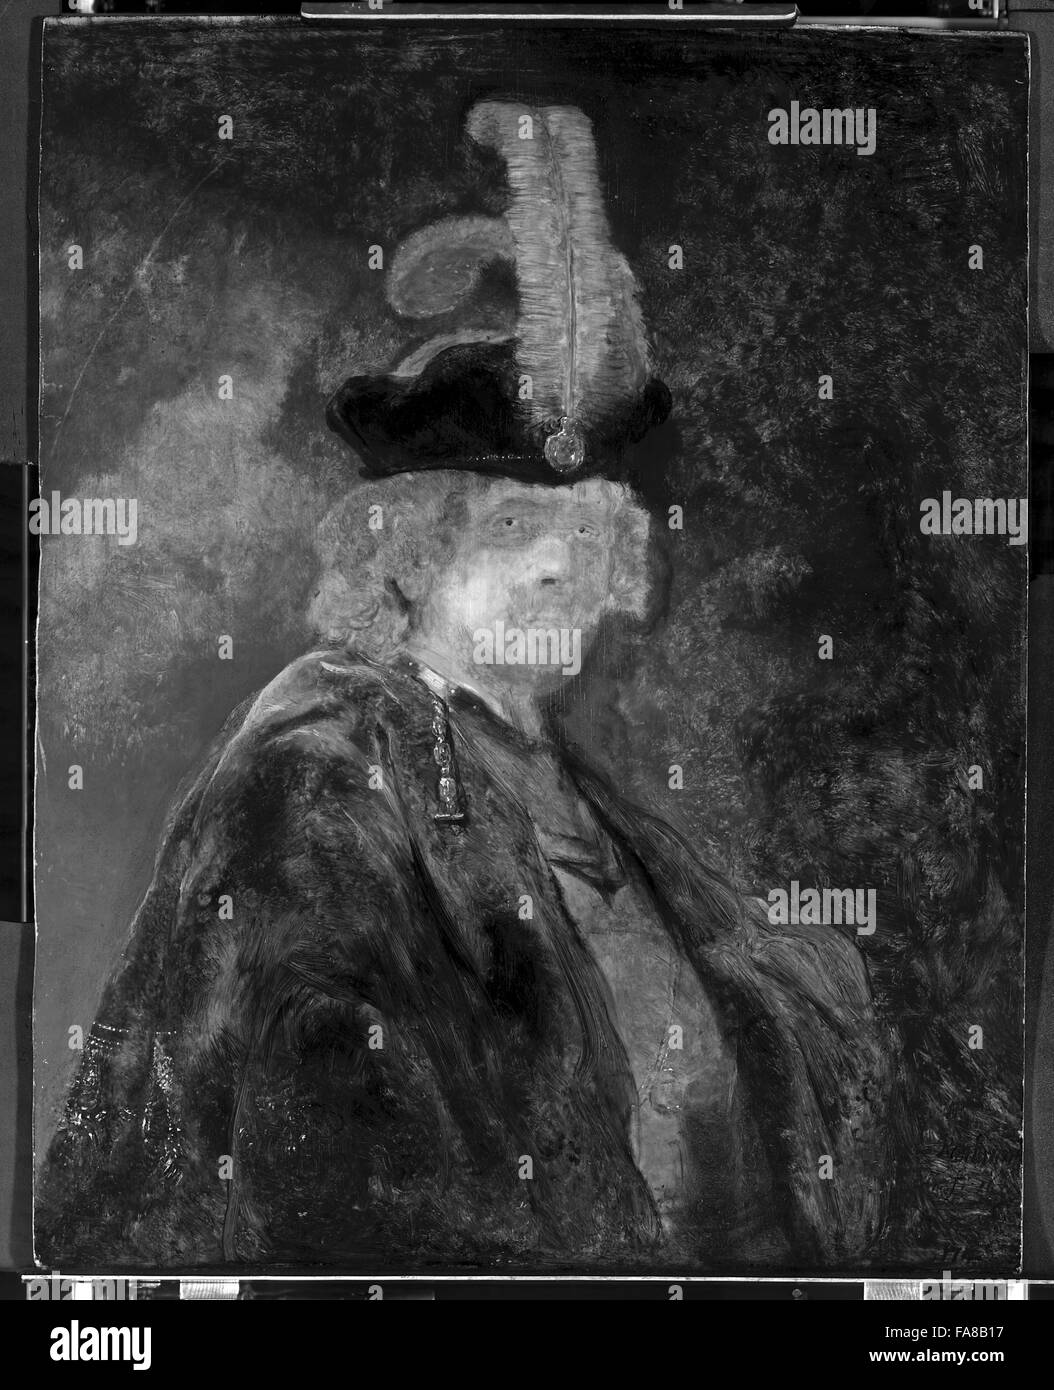 X-Ray of SELF PORTRAIT WEARING A WHITE FEATHERED BONNET, studio of Rembrandt van Rijn (Leyden 1606 - Amsterdam 1669), 1635. Oil on wood panel 959 x 911 mm (37 3/4 x 35 7/8 in). Painting shown in October 2013, prior to analysis and restoration work being u Stock Photo